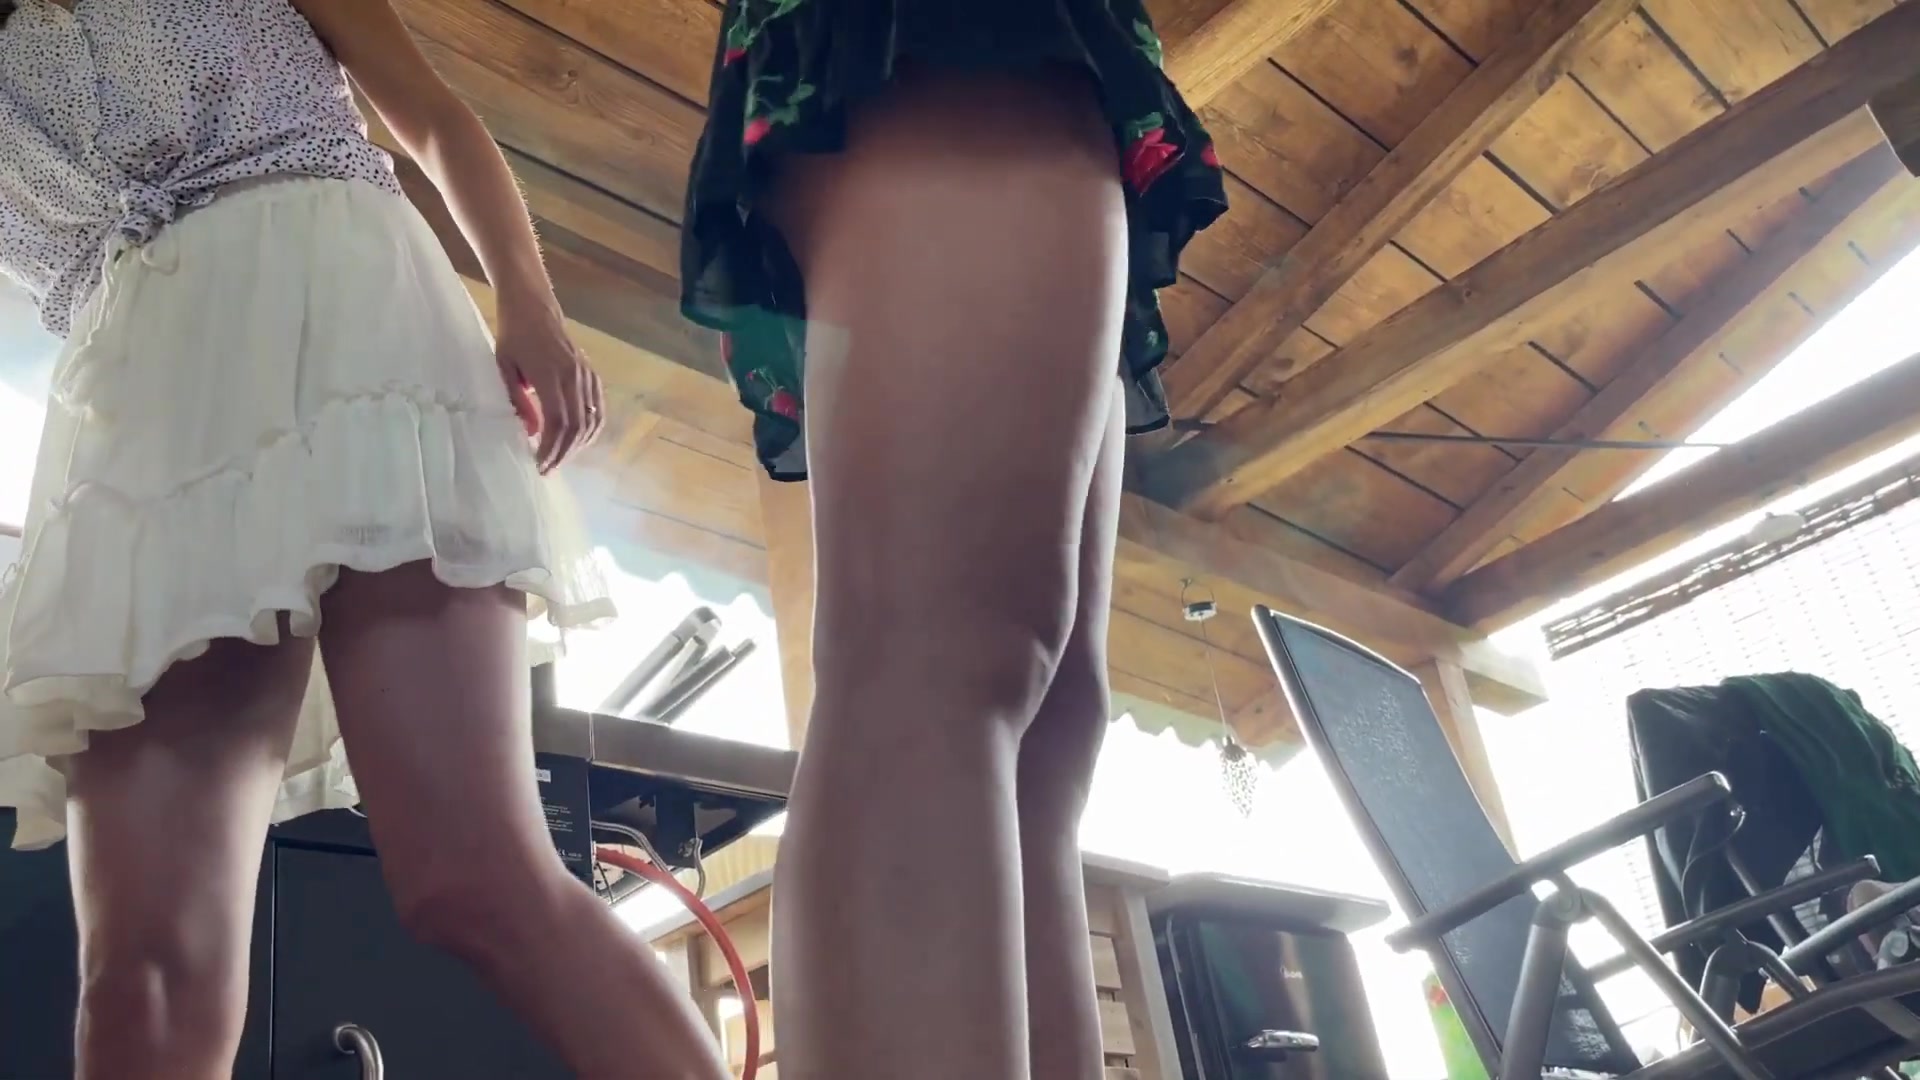 From start upskirts legs but 01:24, 01:28 shaved pussy under skirt and many more bare ass views of no panties girls | Nude Video on YouTube | nudeleted.com